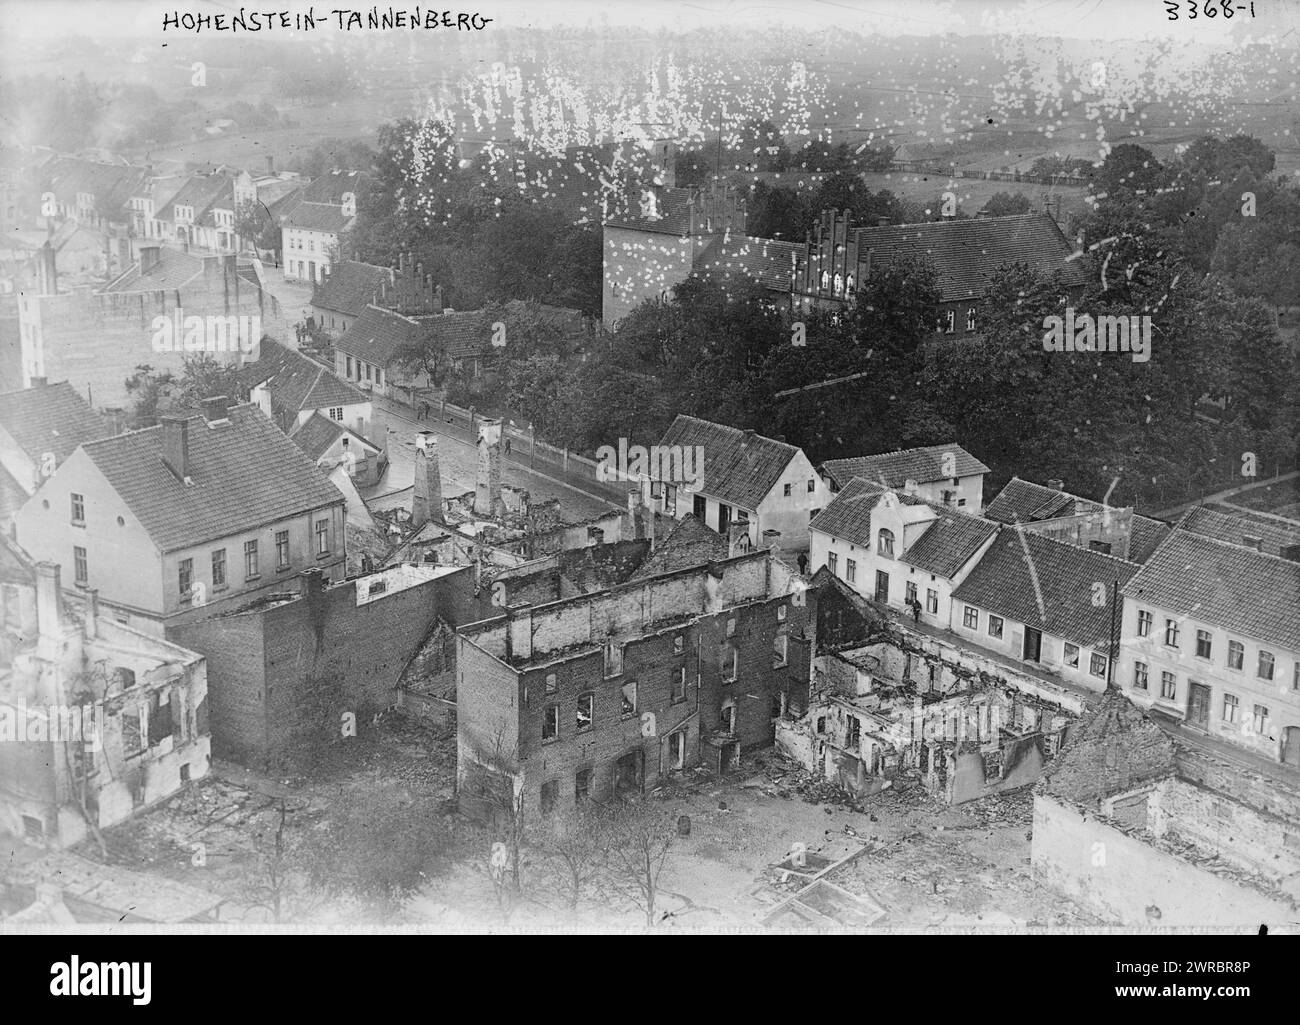 Hohenstein-Tannenberg, Photograph shows aerial view of the town of Hohenstein, (now Olsztynek, Poland) during World War I., between 1914 and ca. 1915, World War, 1914-1918, Glass negatives, 1 negative: glass Stock Photo